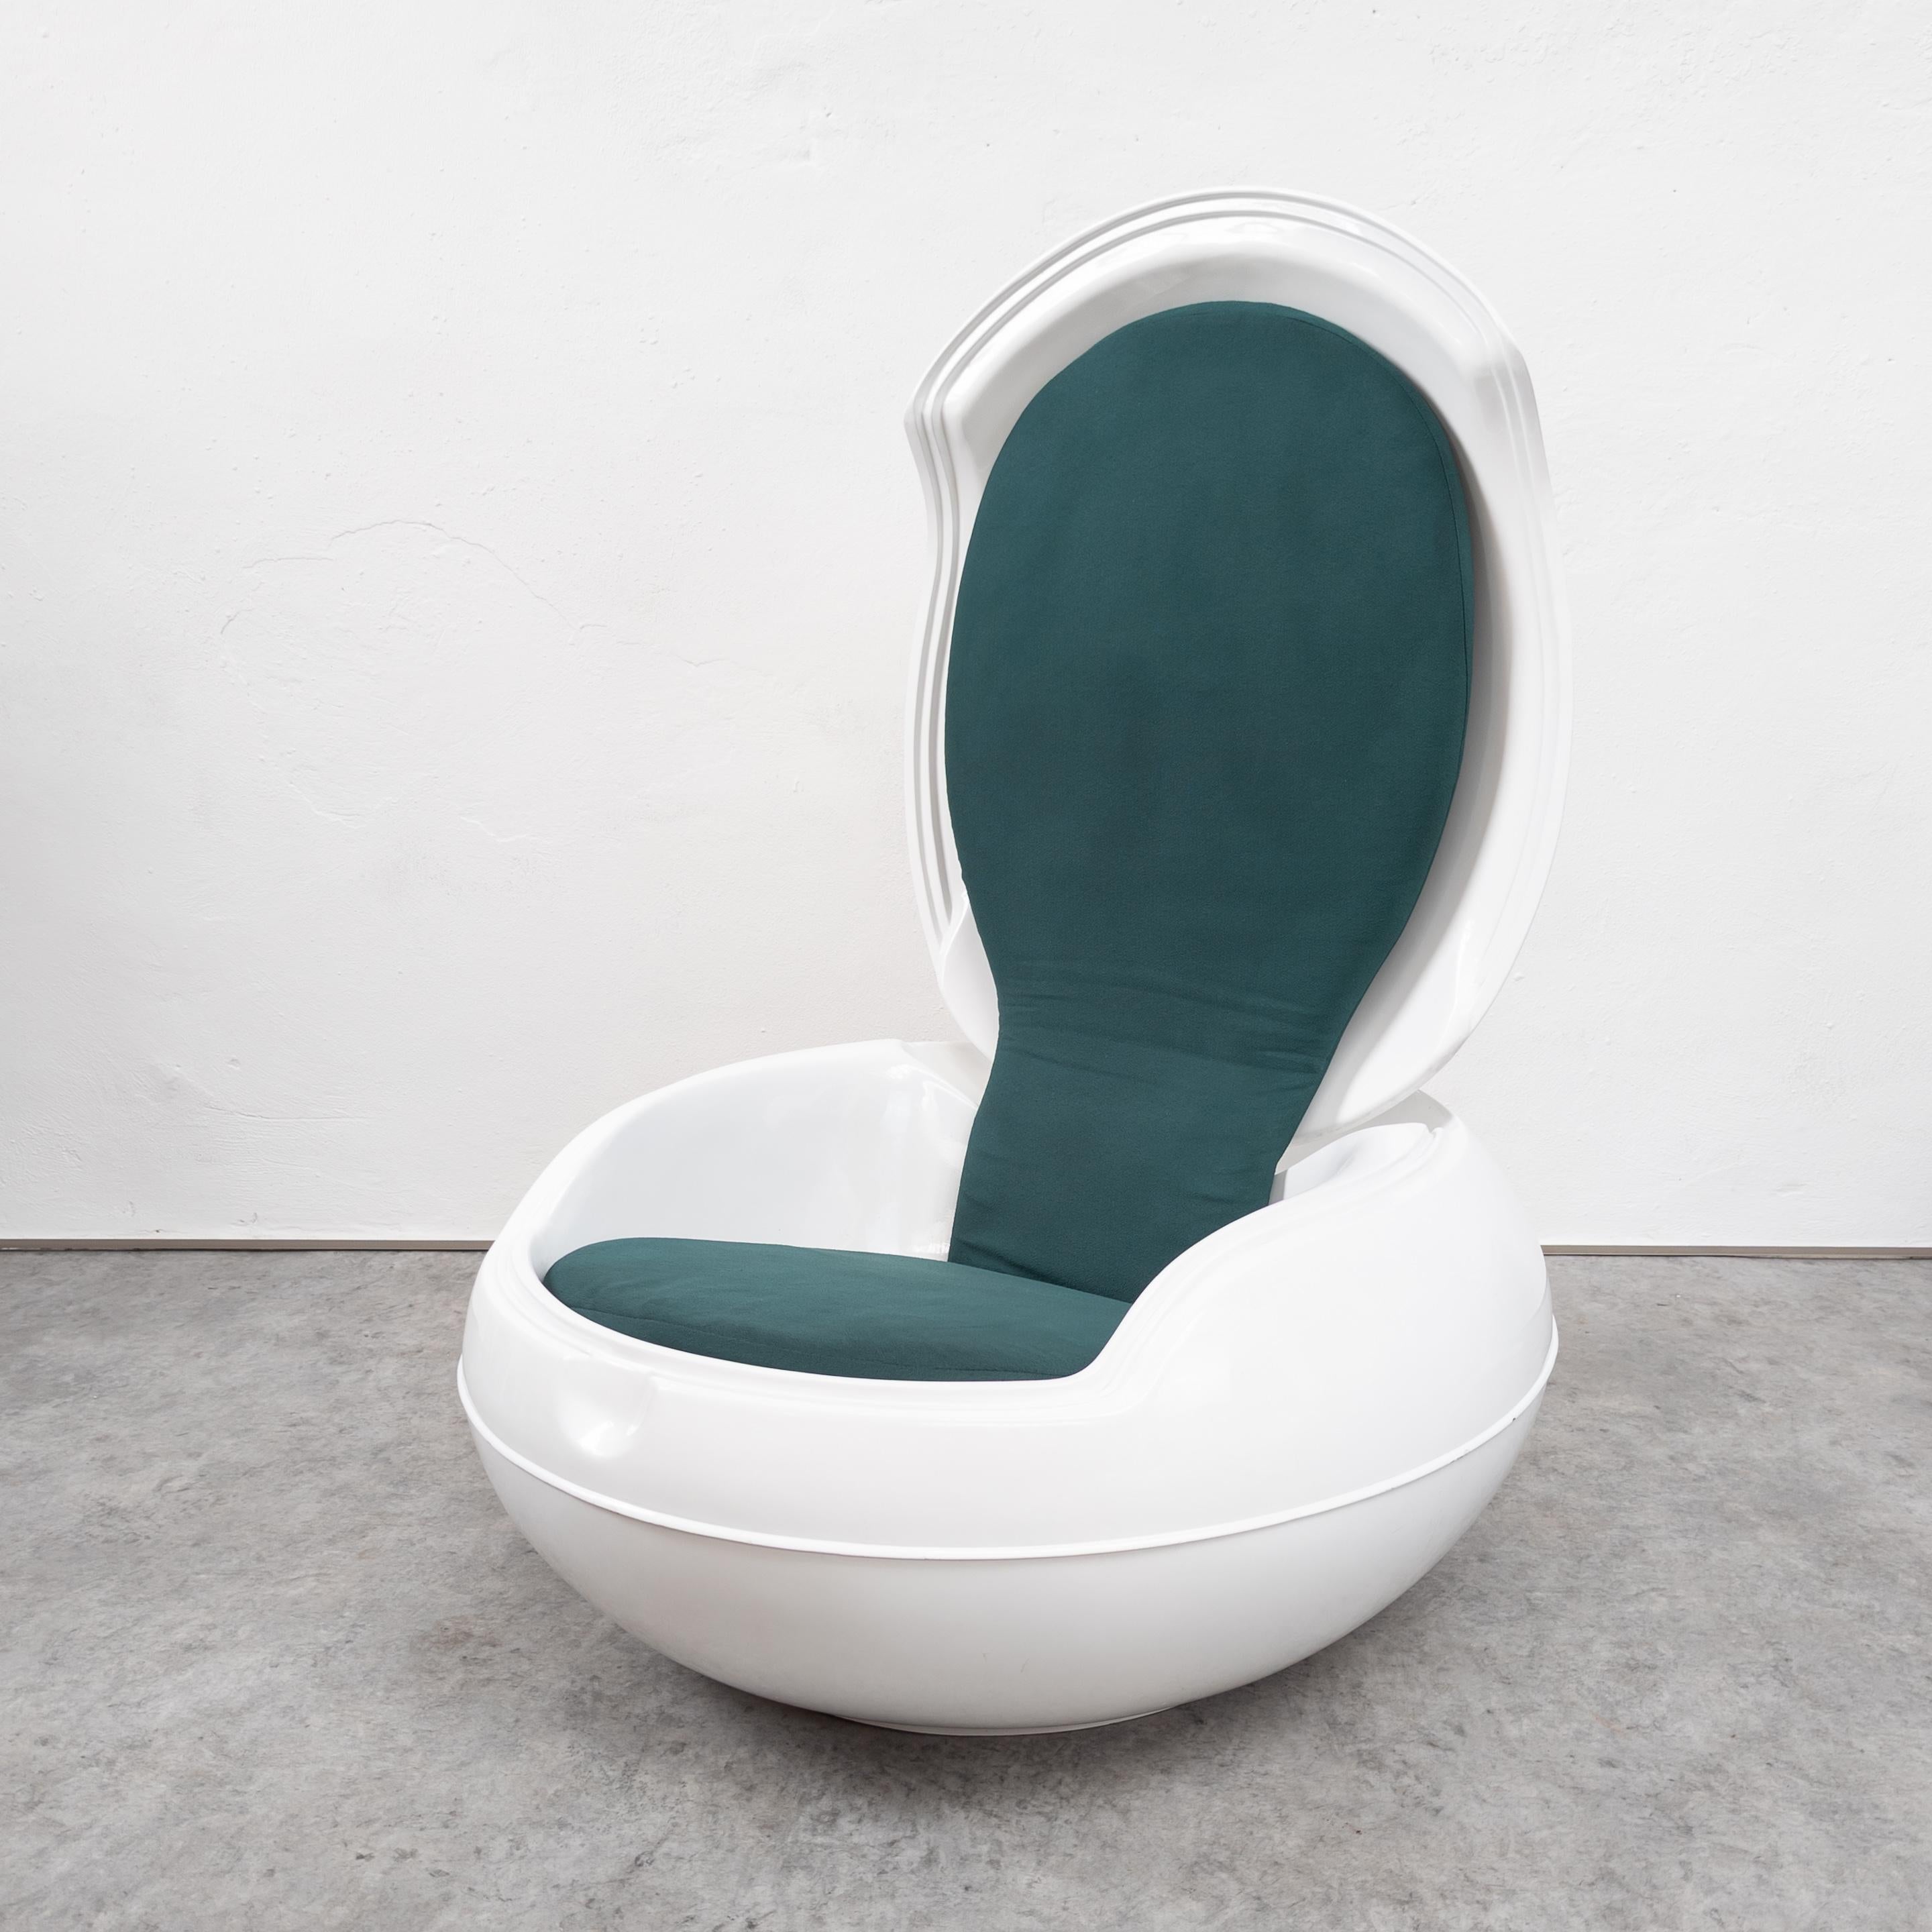 White vintage Space Age plastic garden egg chair designed by Peter Ghyczy for Reuter Products, Germany 1968. Made of fiberglass - reinforced polyester shell with green fabric covered internal upholstery. The back of this innovative indoor / outdoor